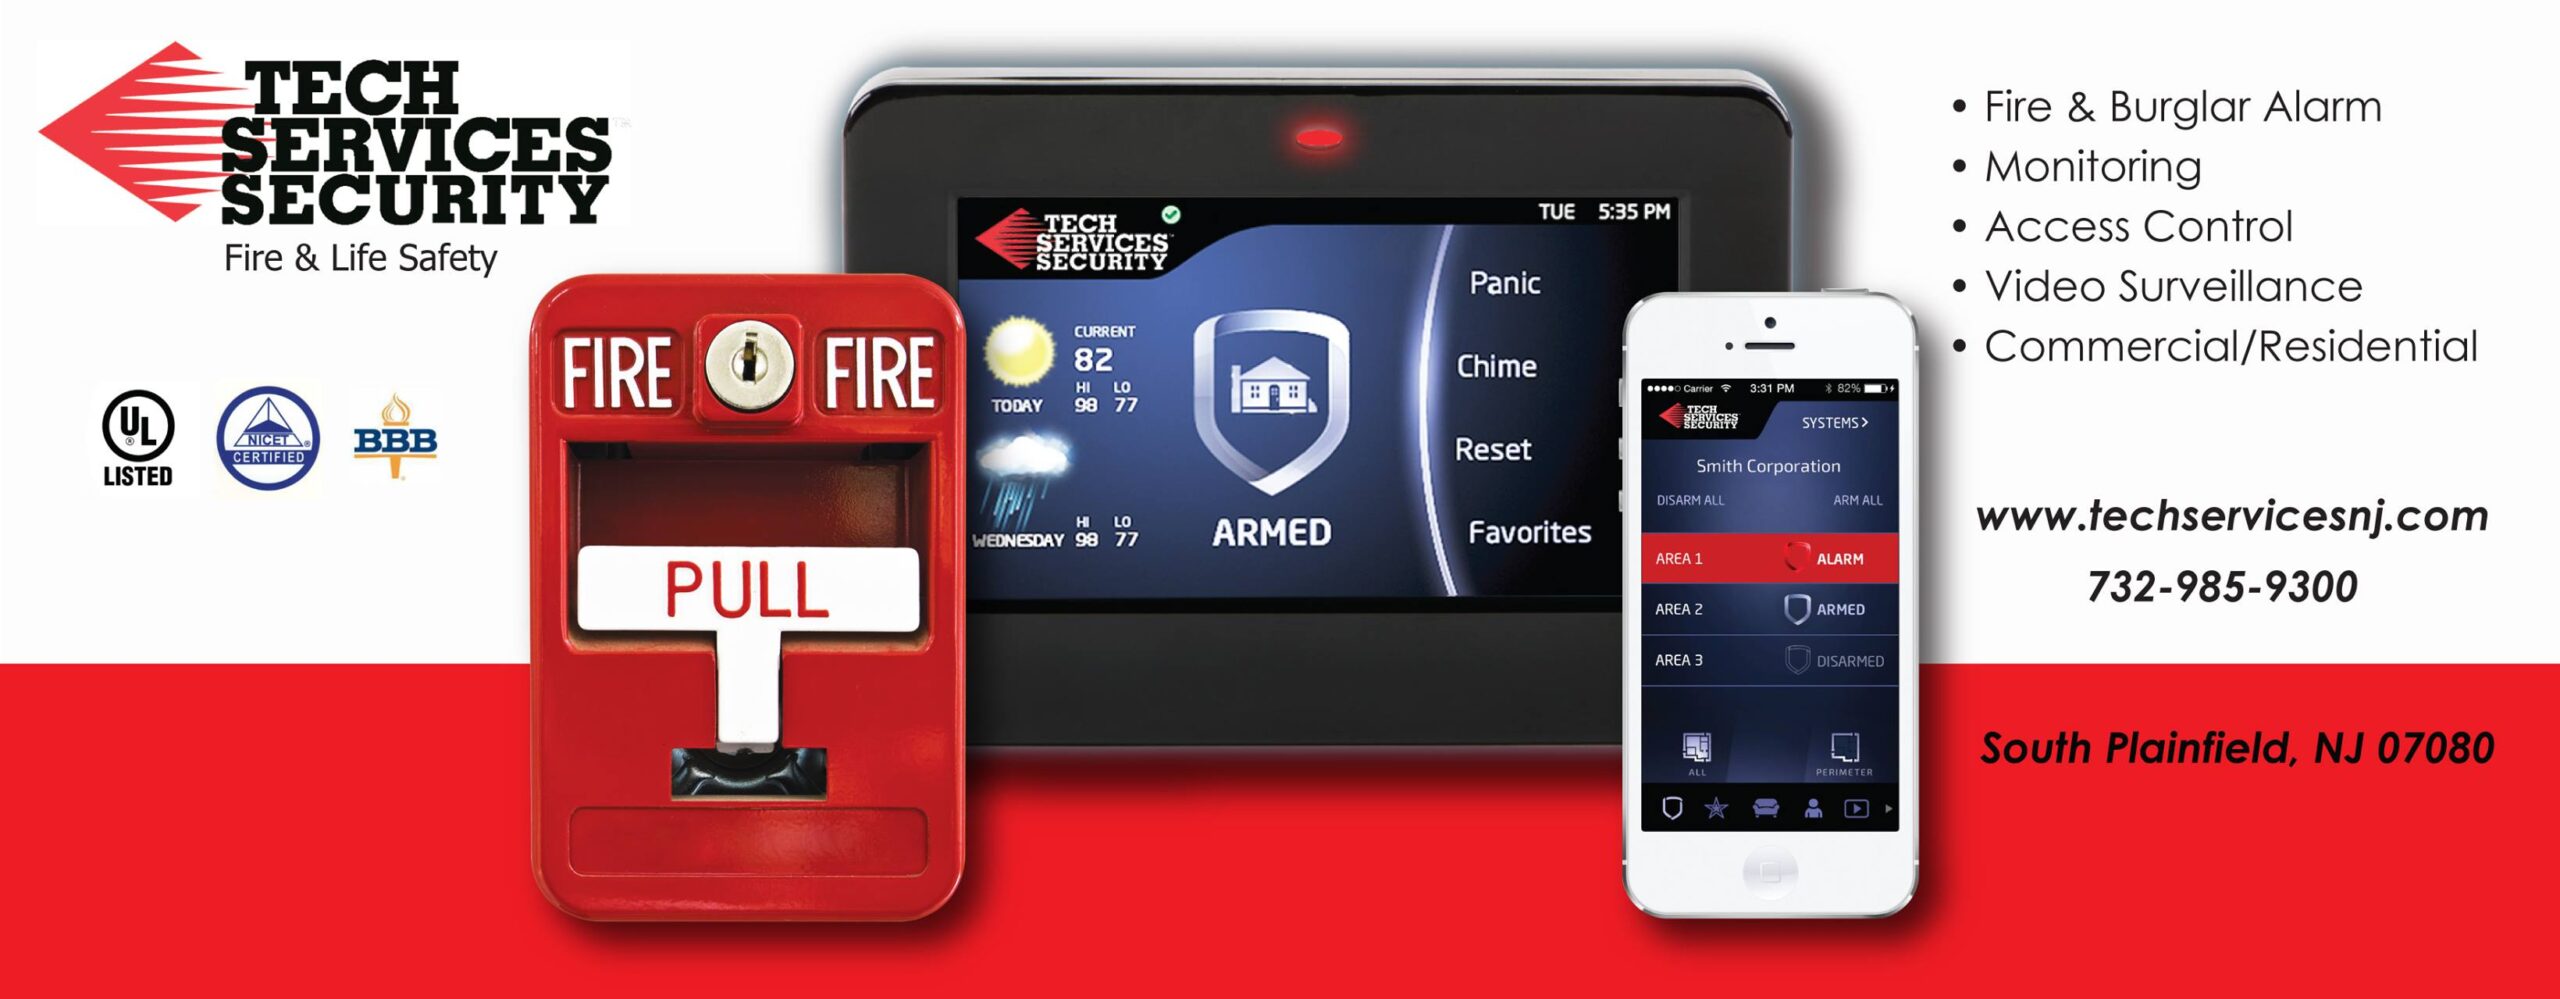 Fire alarm installation services in NJ: Get the best protection for your business with Tech Services of NJ